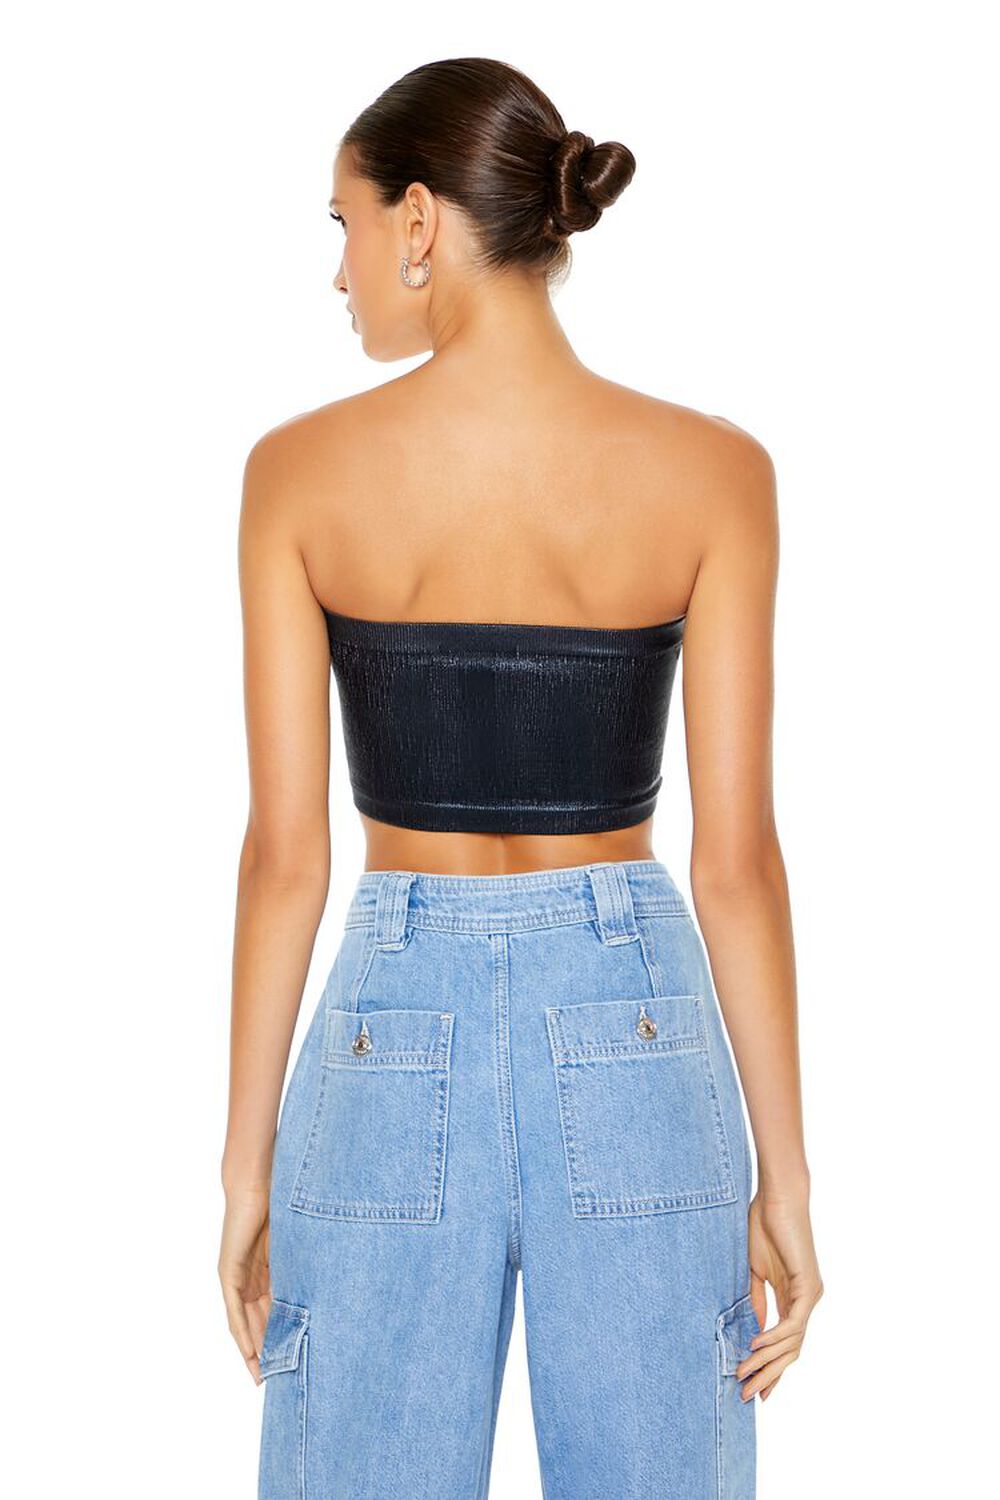 BLACK Seamless Cropped Tube Top, image 3